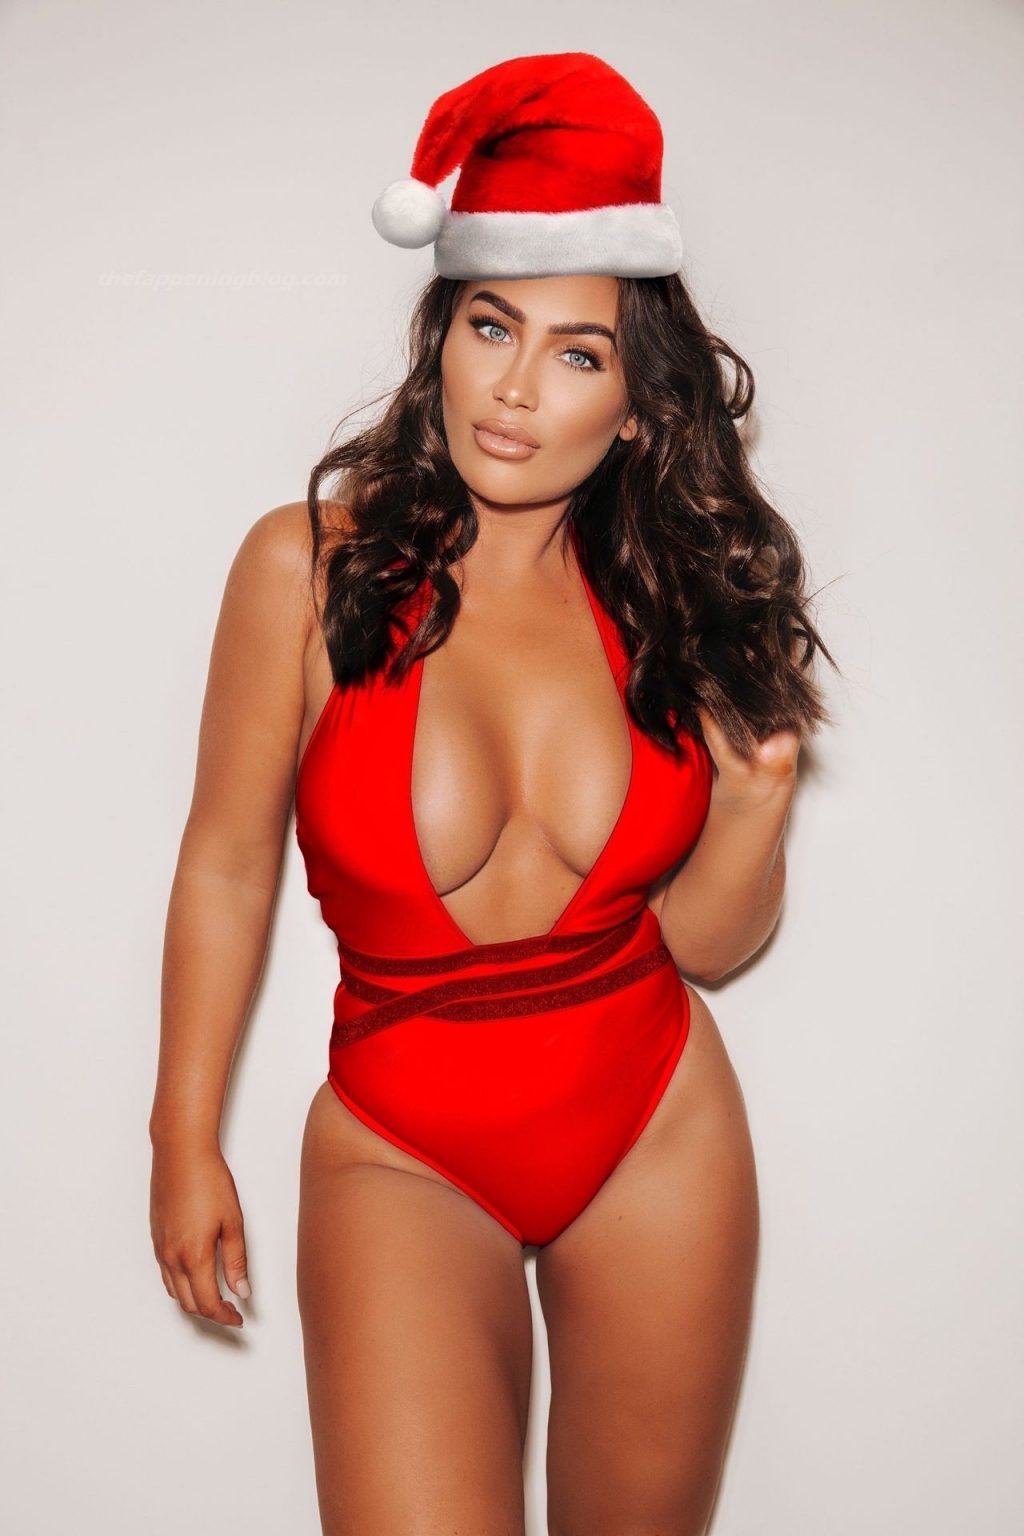 Lauren Goodger Shows Off Her Infamous Bum in a Sexy Santa Outfit (5 Photos)